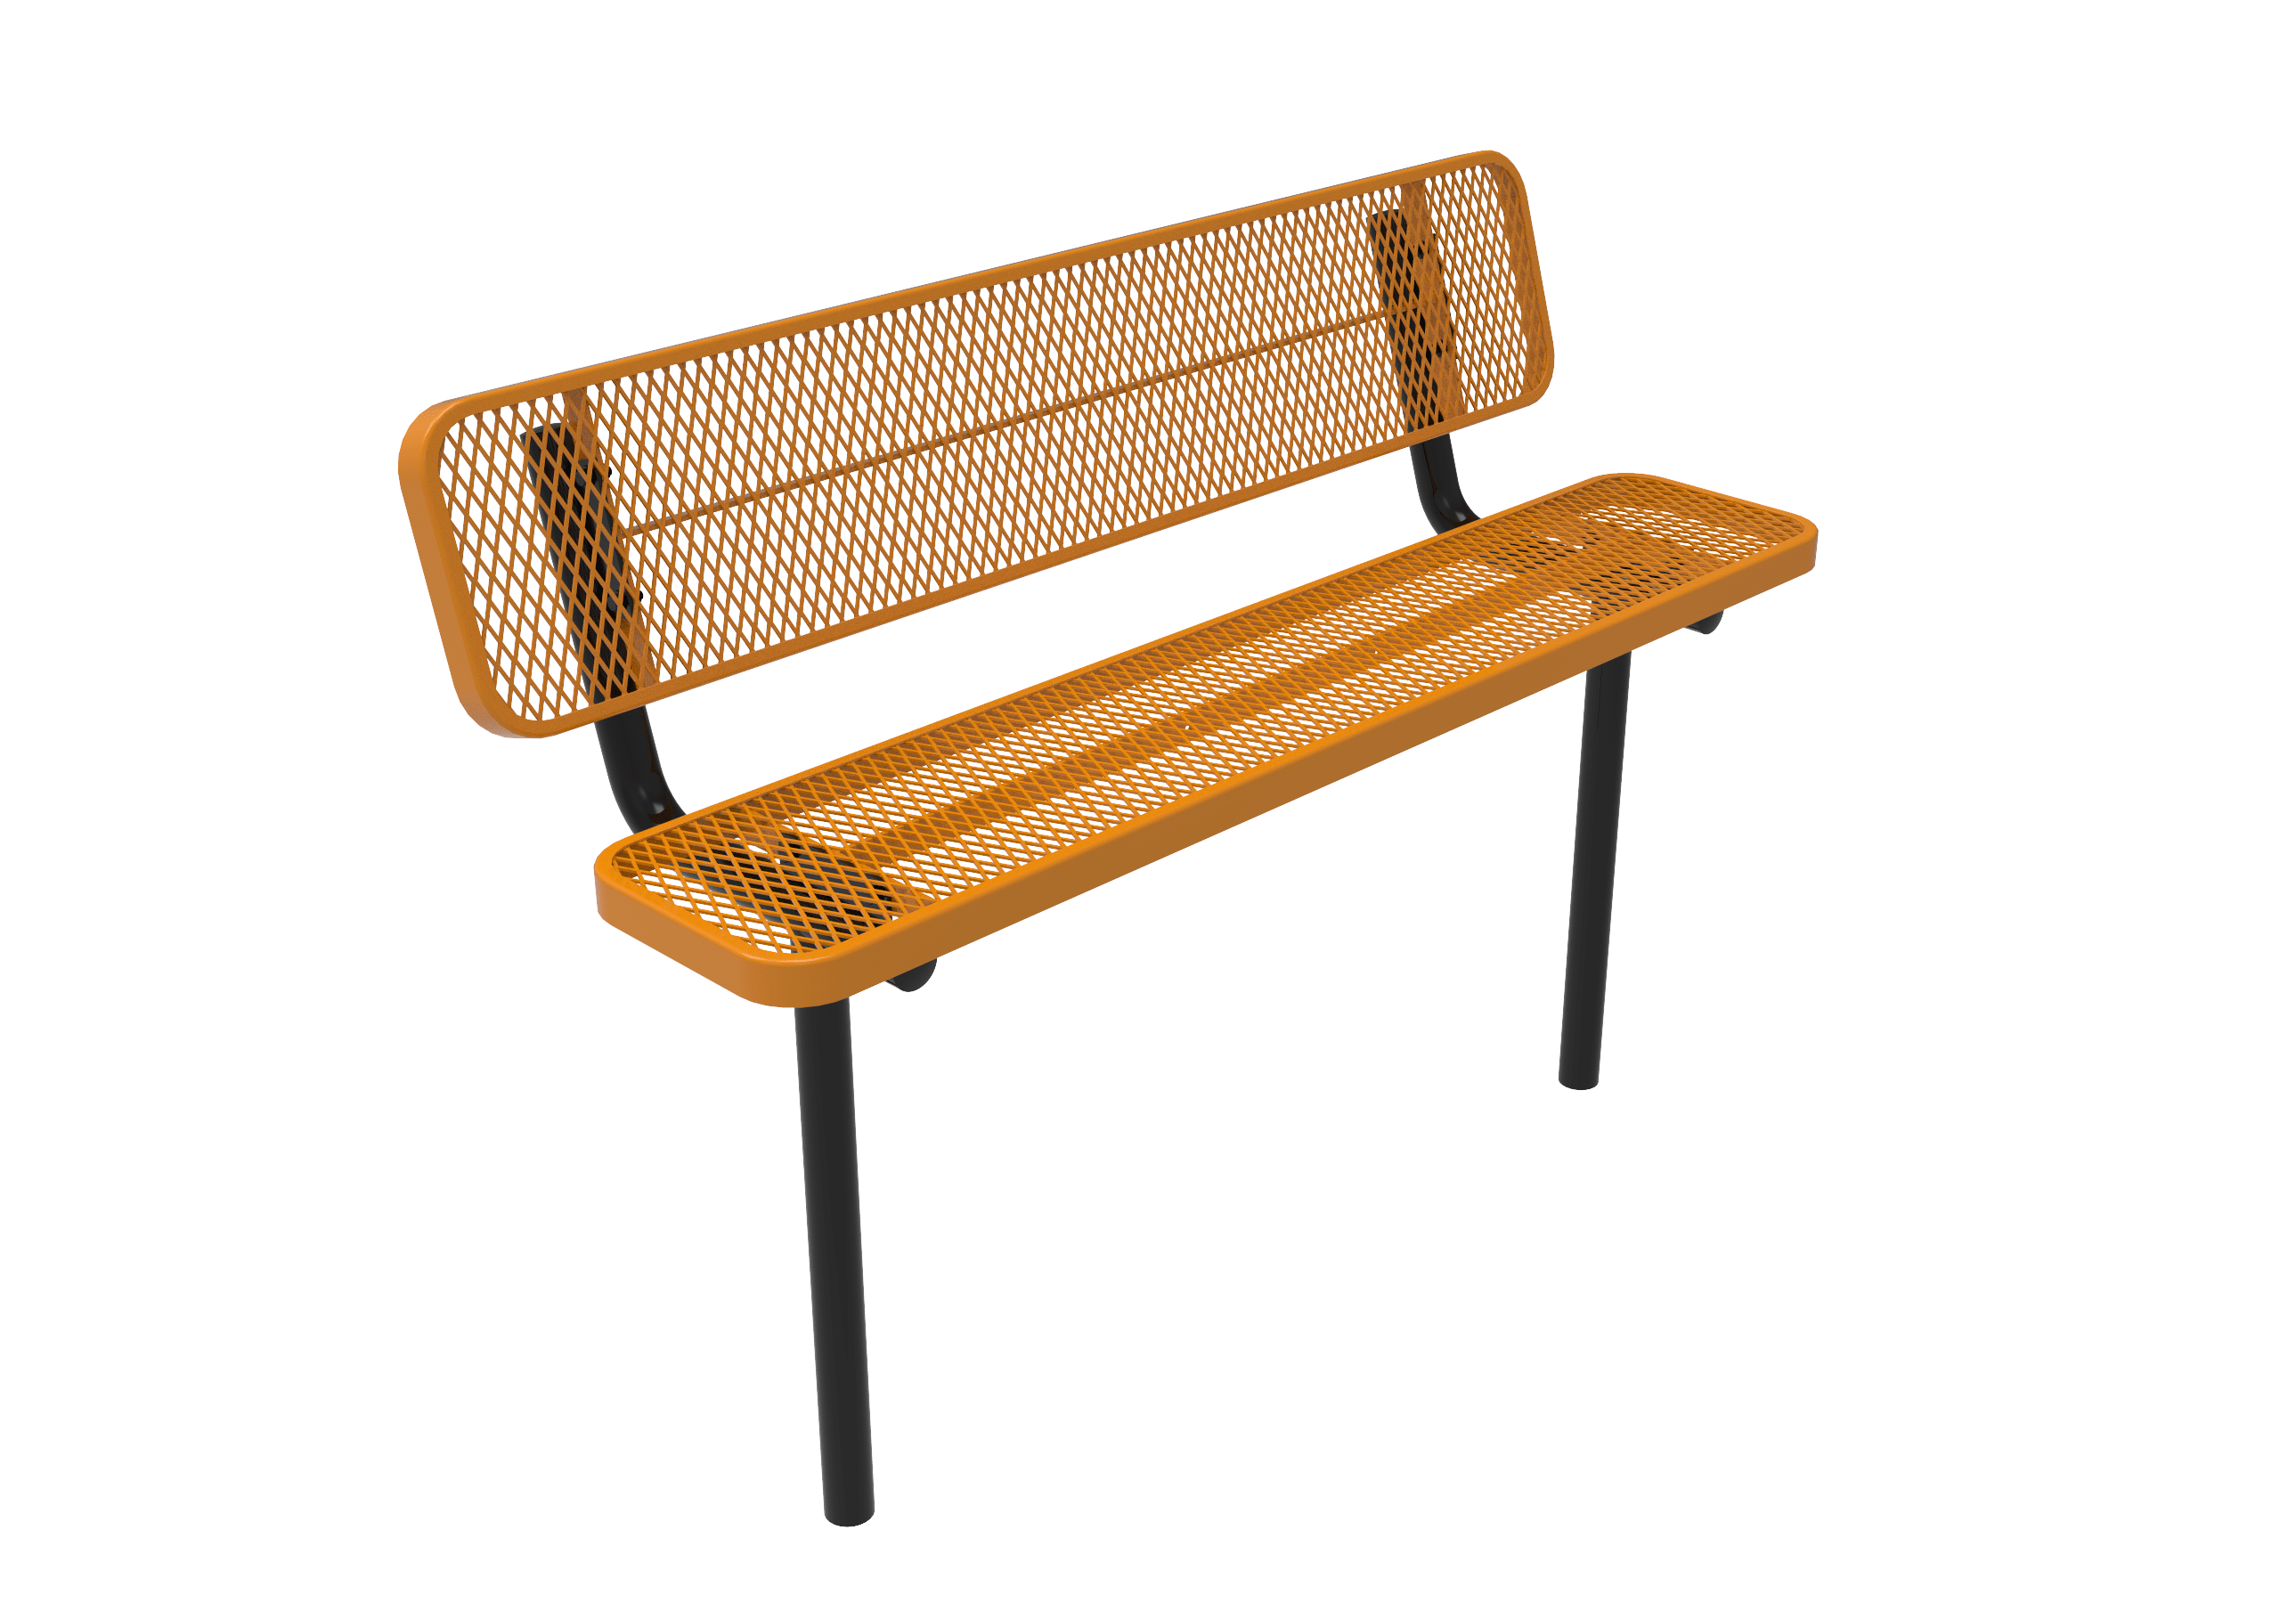 8′ Players Bench With Back-Mesh
BPY08-C-31-000
Industry Standard Finish
$799.00
BPY08-A-31-000
Advantage Premium Finish
$999.00
